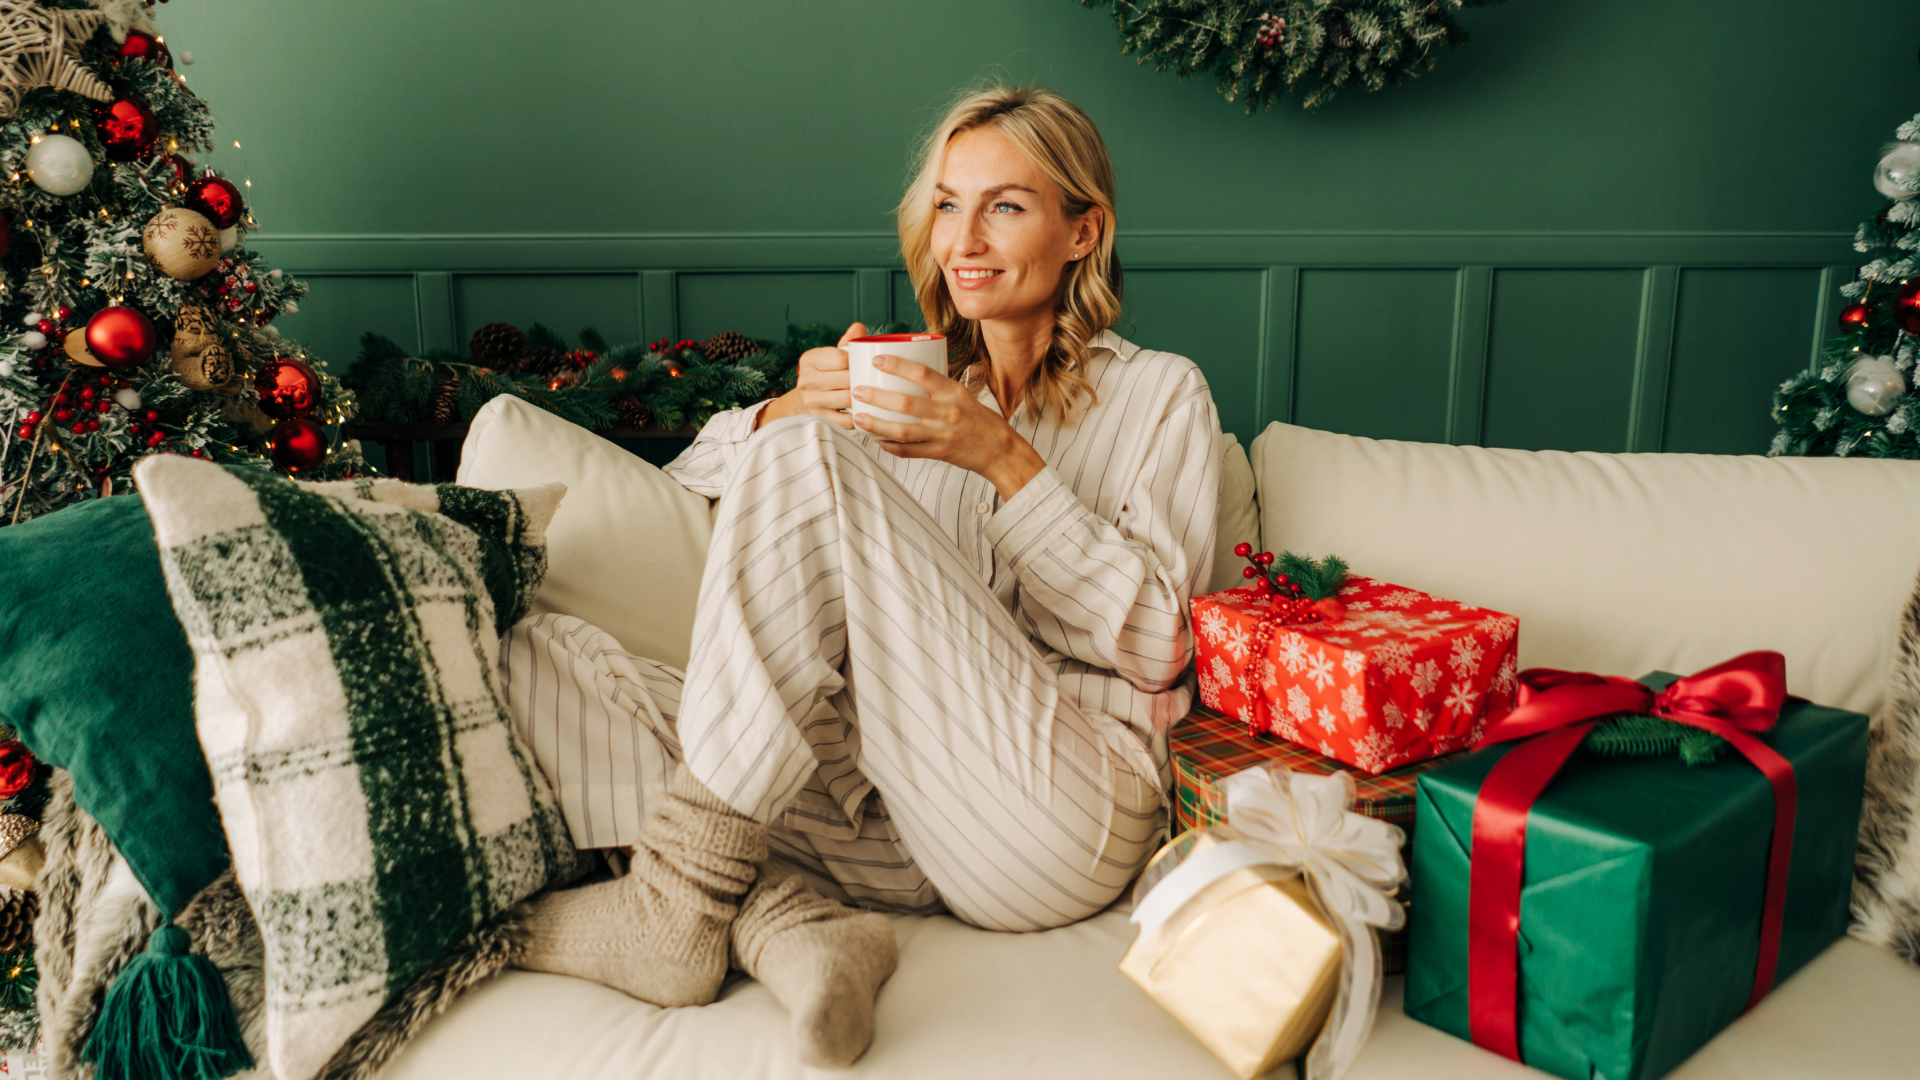 I'm Using Nordstrom's Half-Yearly Sale to Stock Up on Comfy-Cozy Pajamas